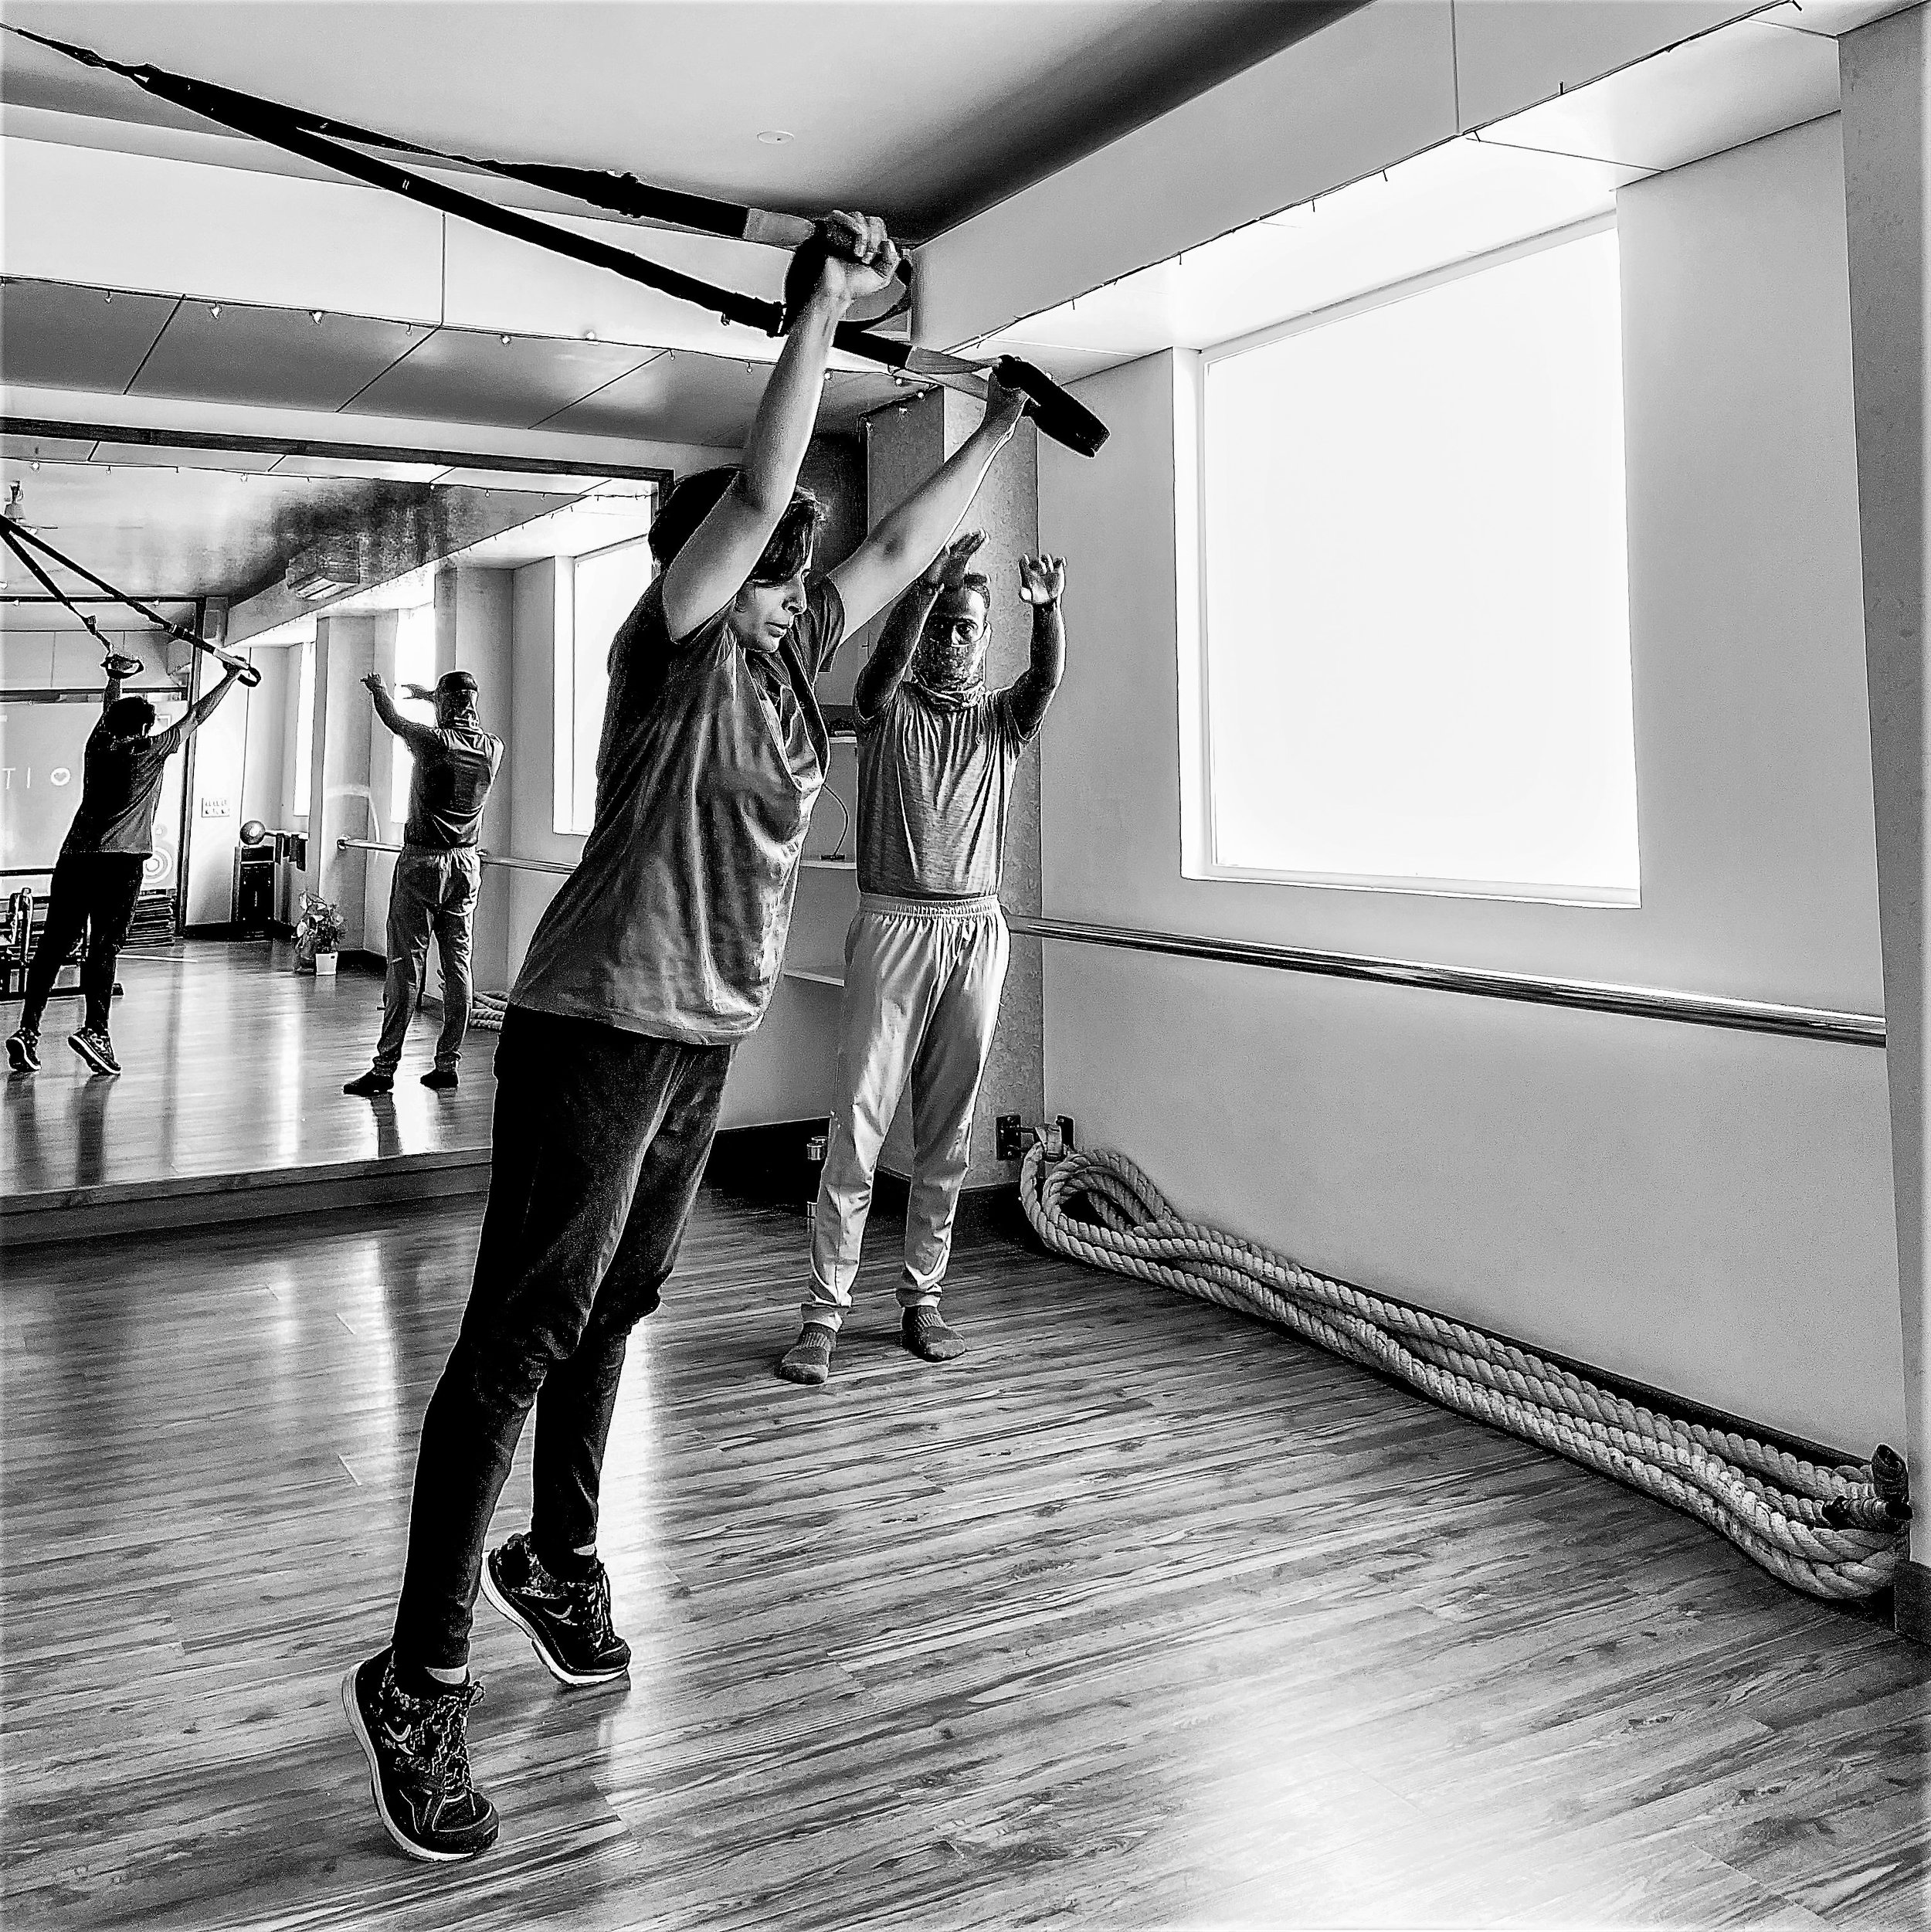 TRX personal training at The Zone Mind and Body Studio